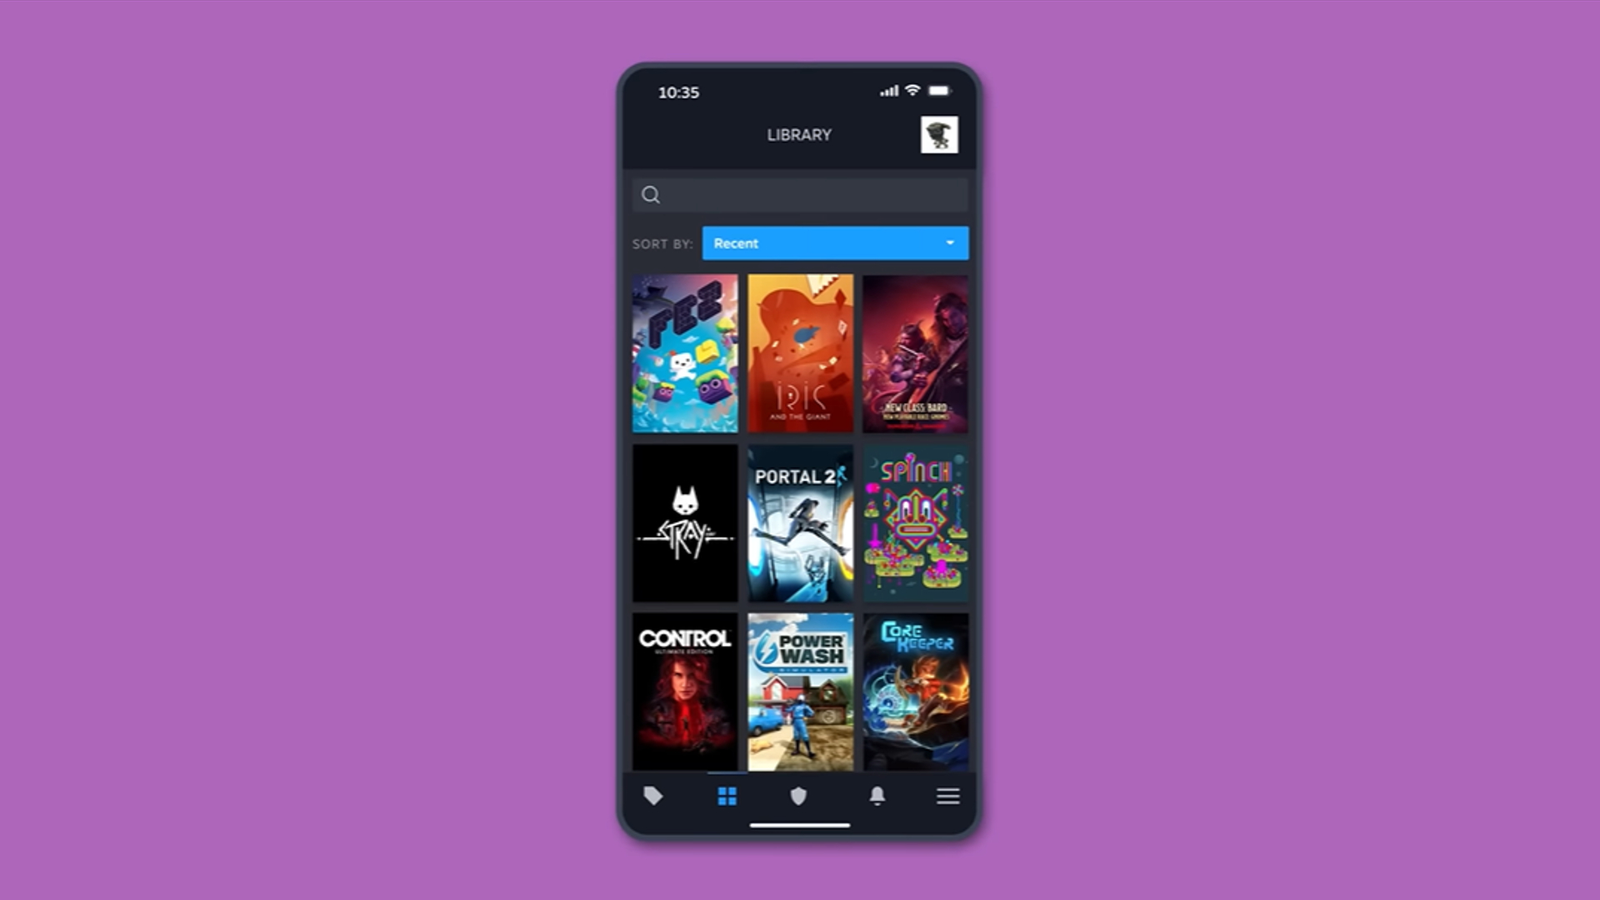 Download Steam Mobile for Android